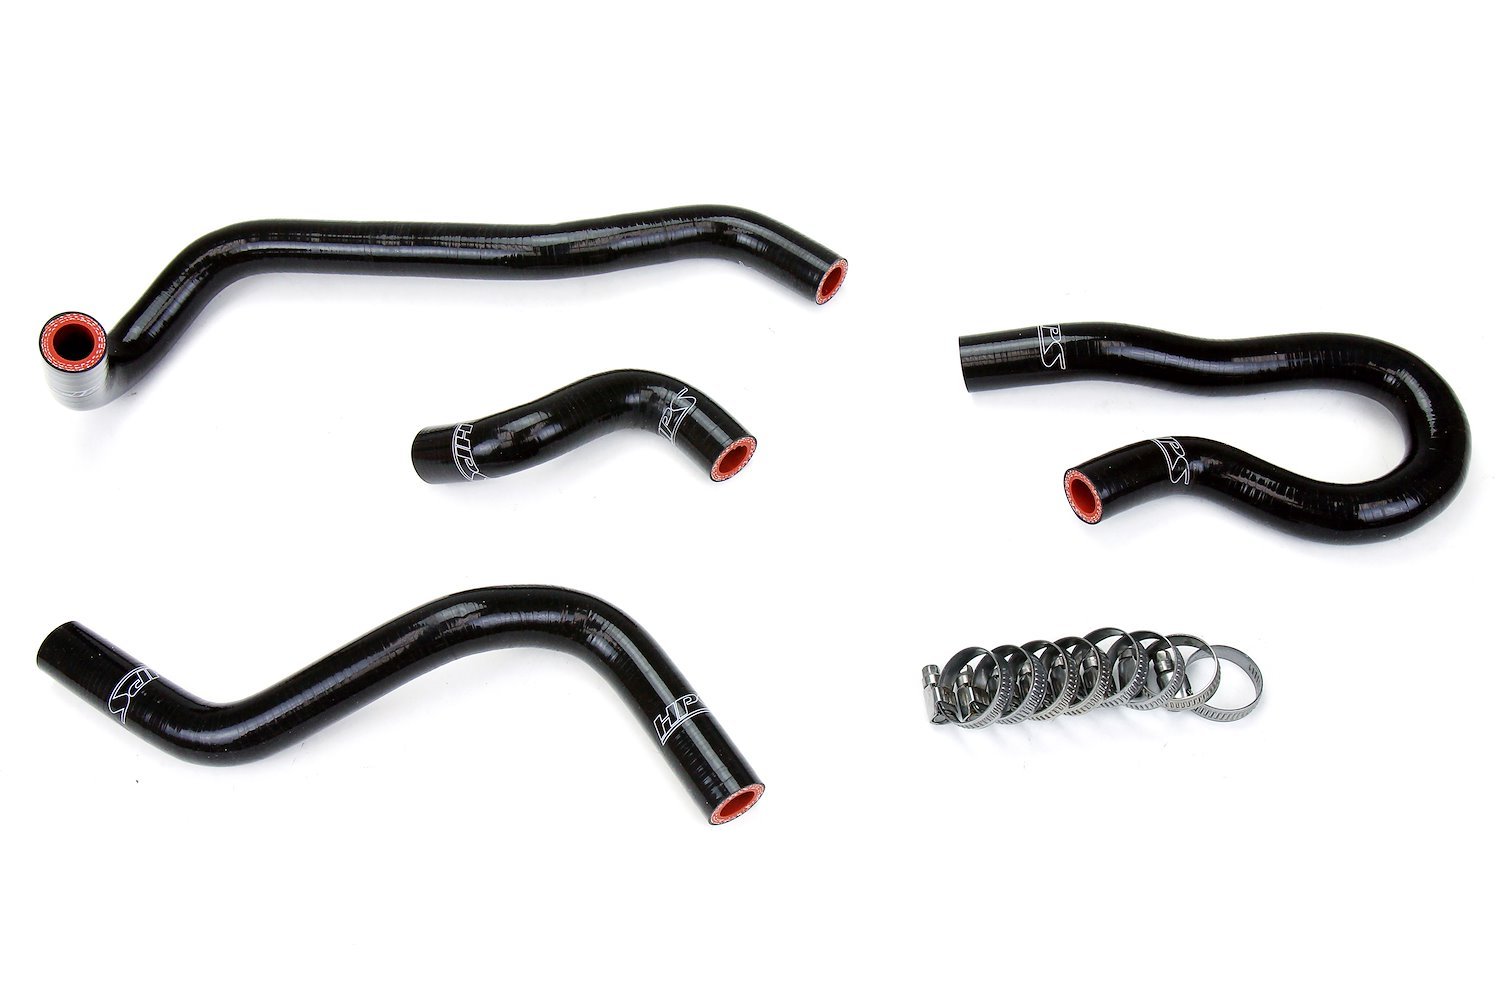 57-1775-BLK Heater Hose Kit, 3-Ply Reinforced Silicone, Replaces Rubber Heater Coolant & Water Bypass Hoses